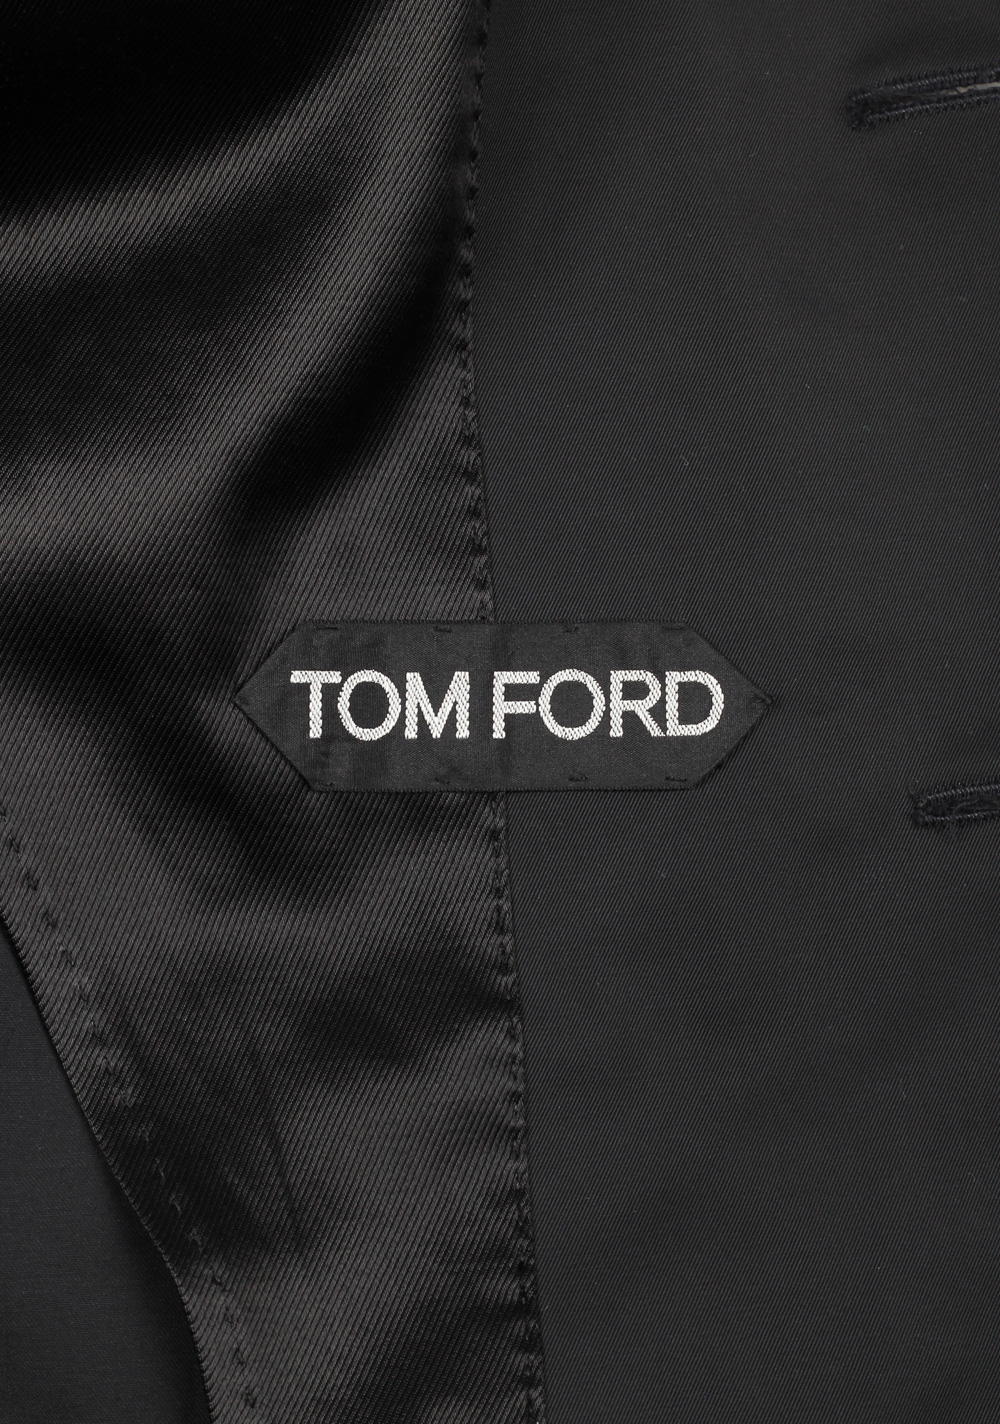 TOM FORD Black Military Field Jacket Coat Size 52 / 42R U.S. Outerwear ...